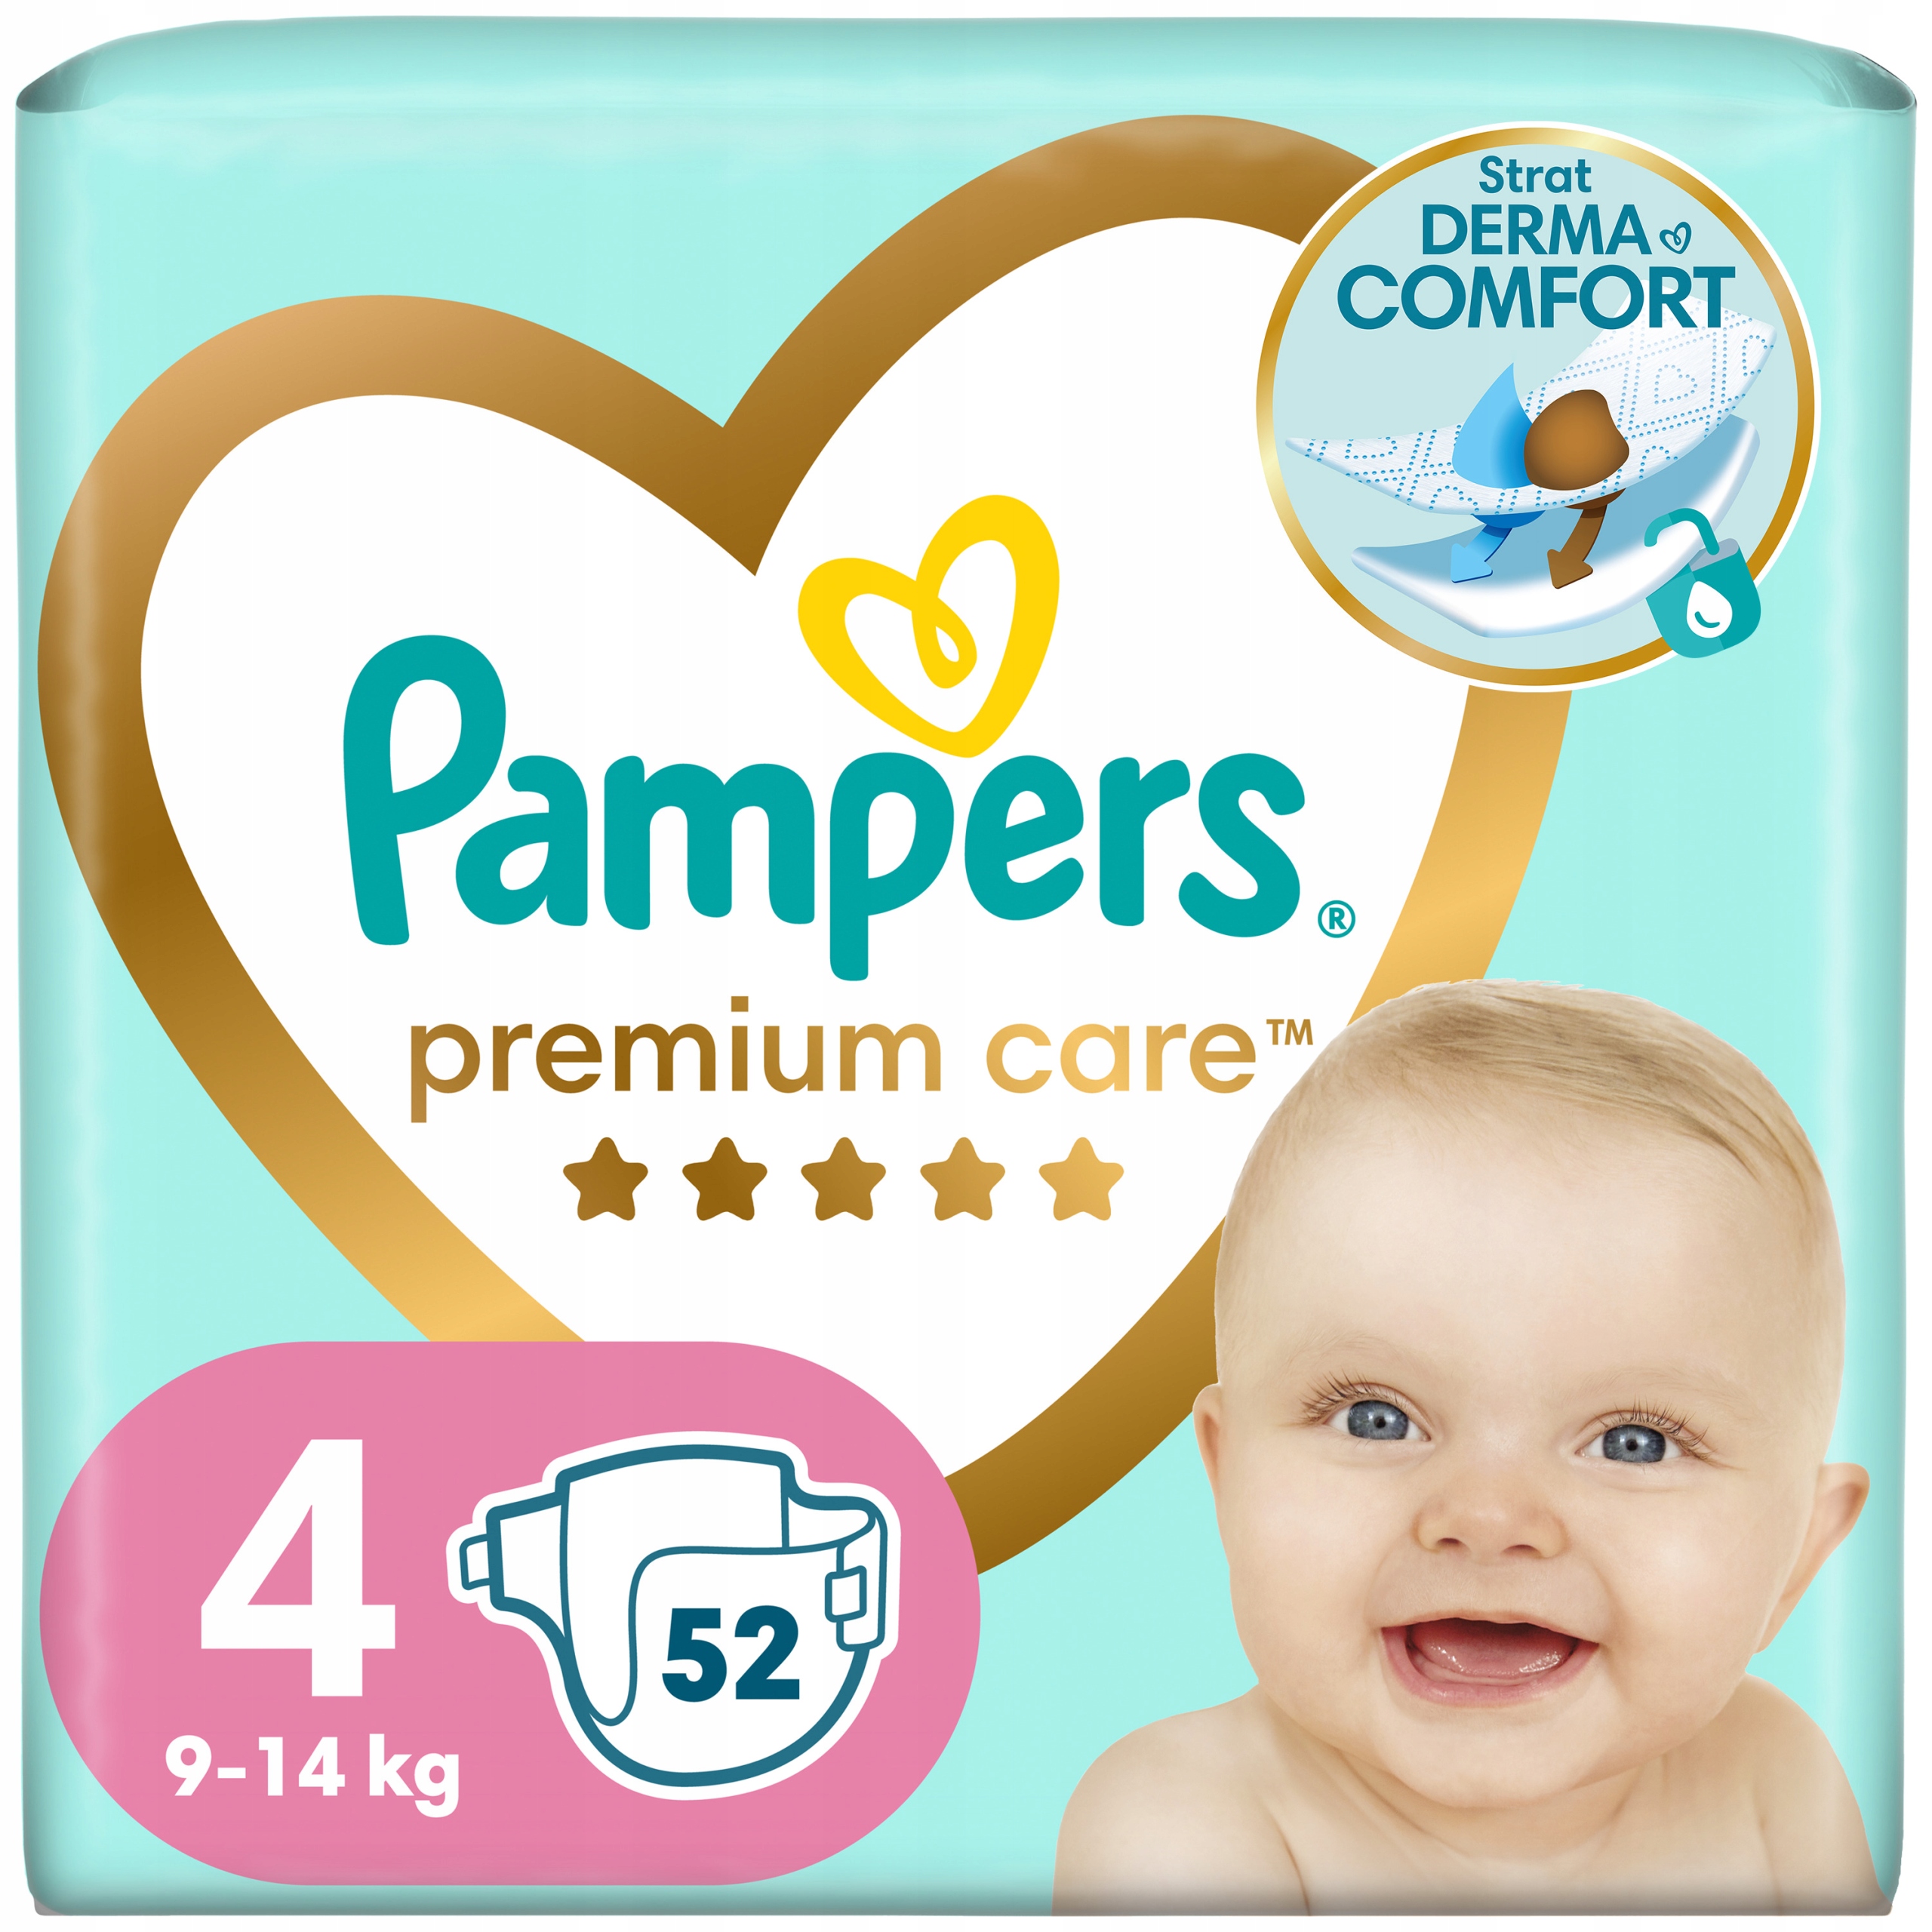 pampers size 2 giga pack